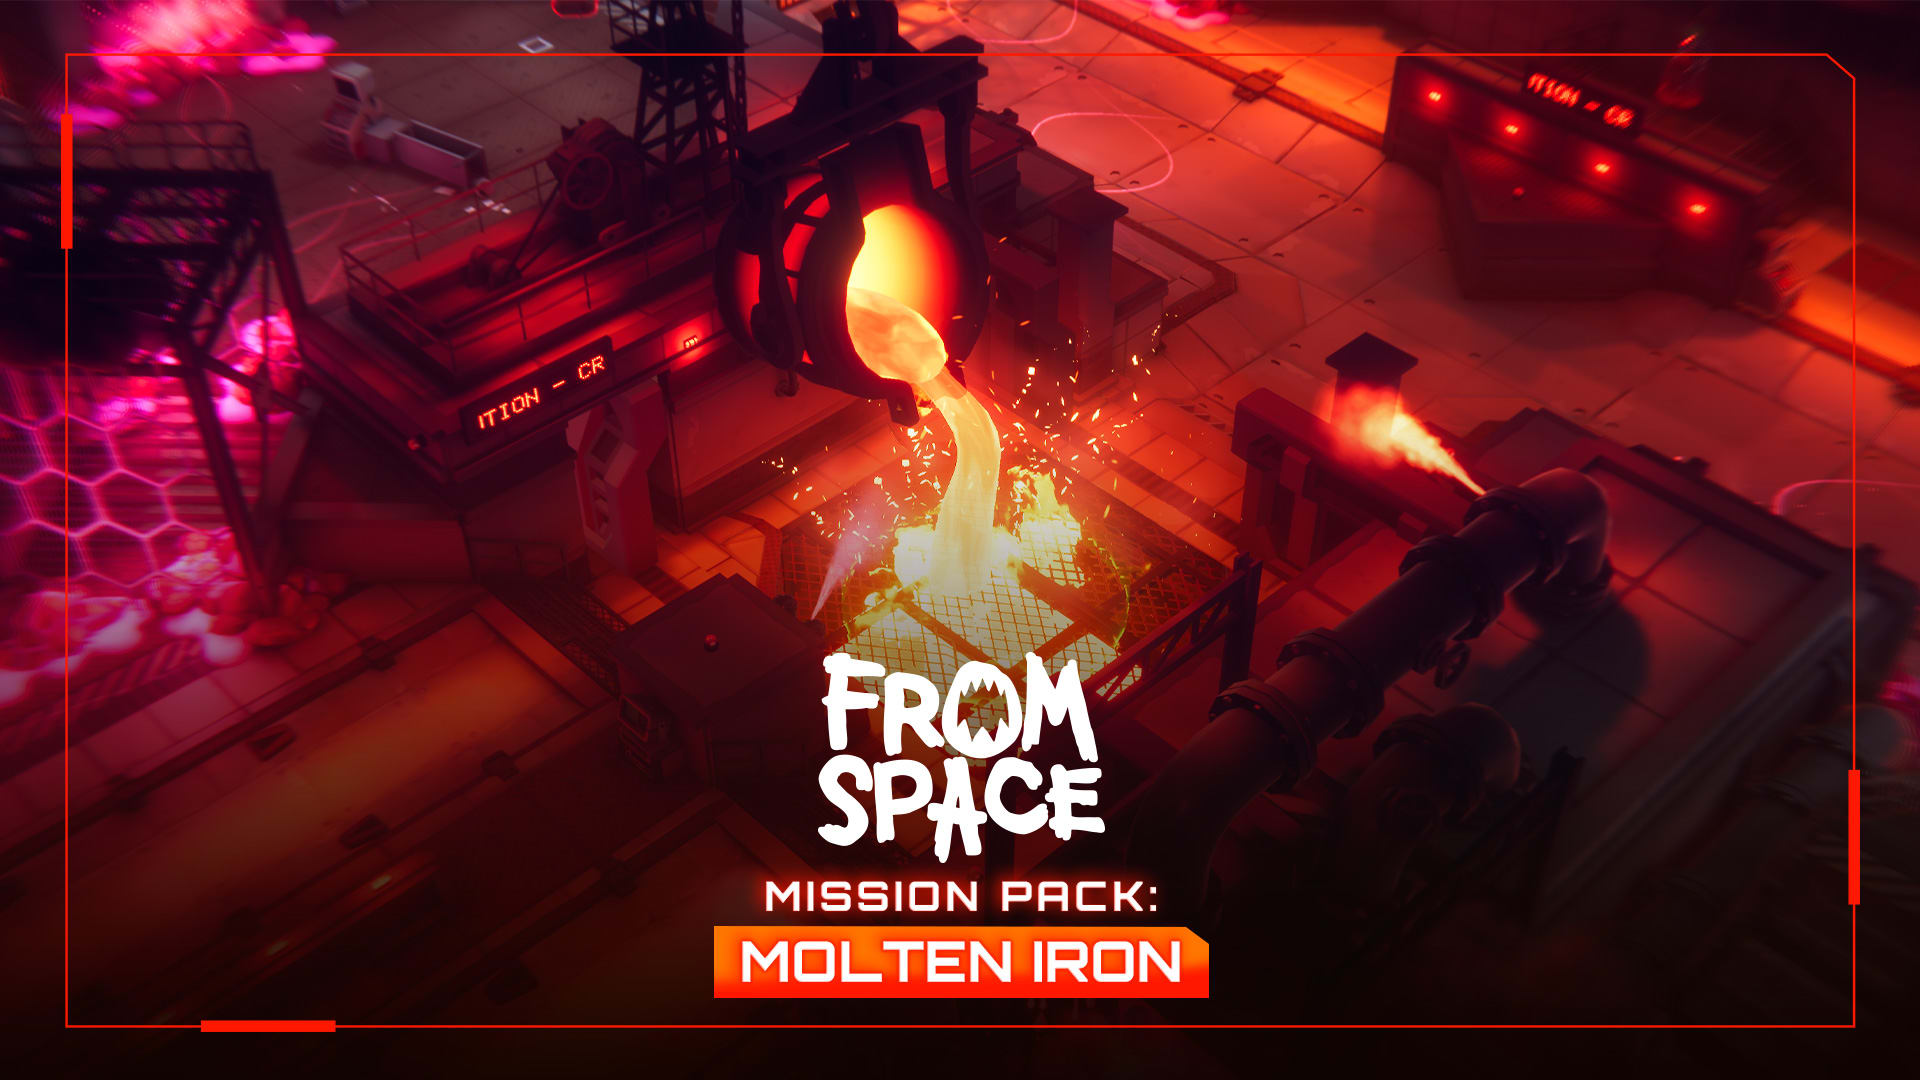 From Space Mission Pack: Molten Iron